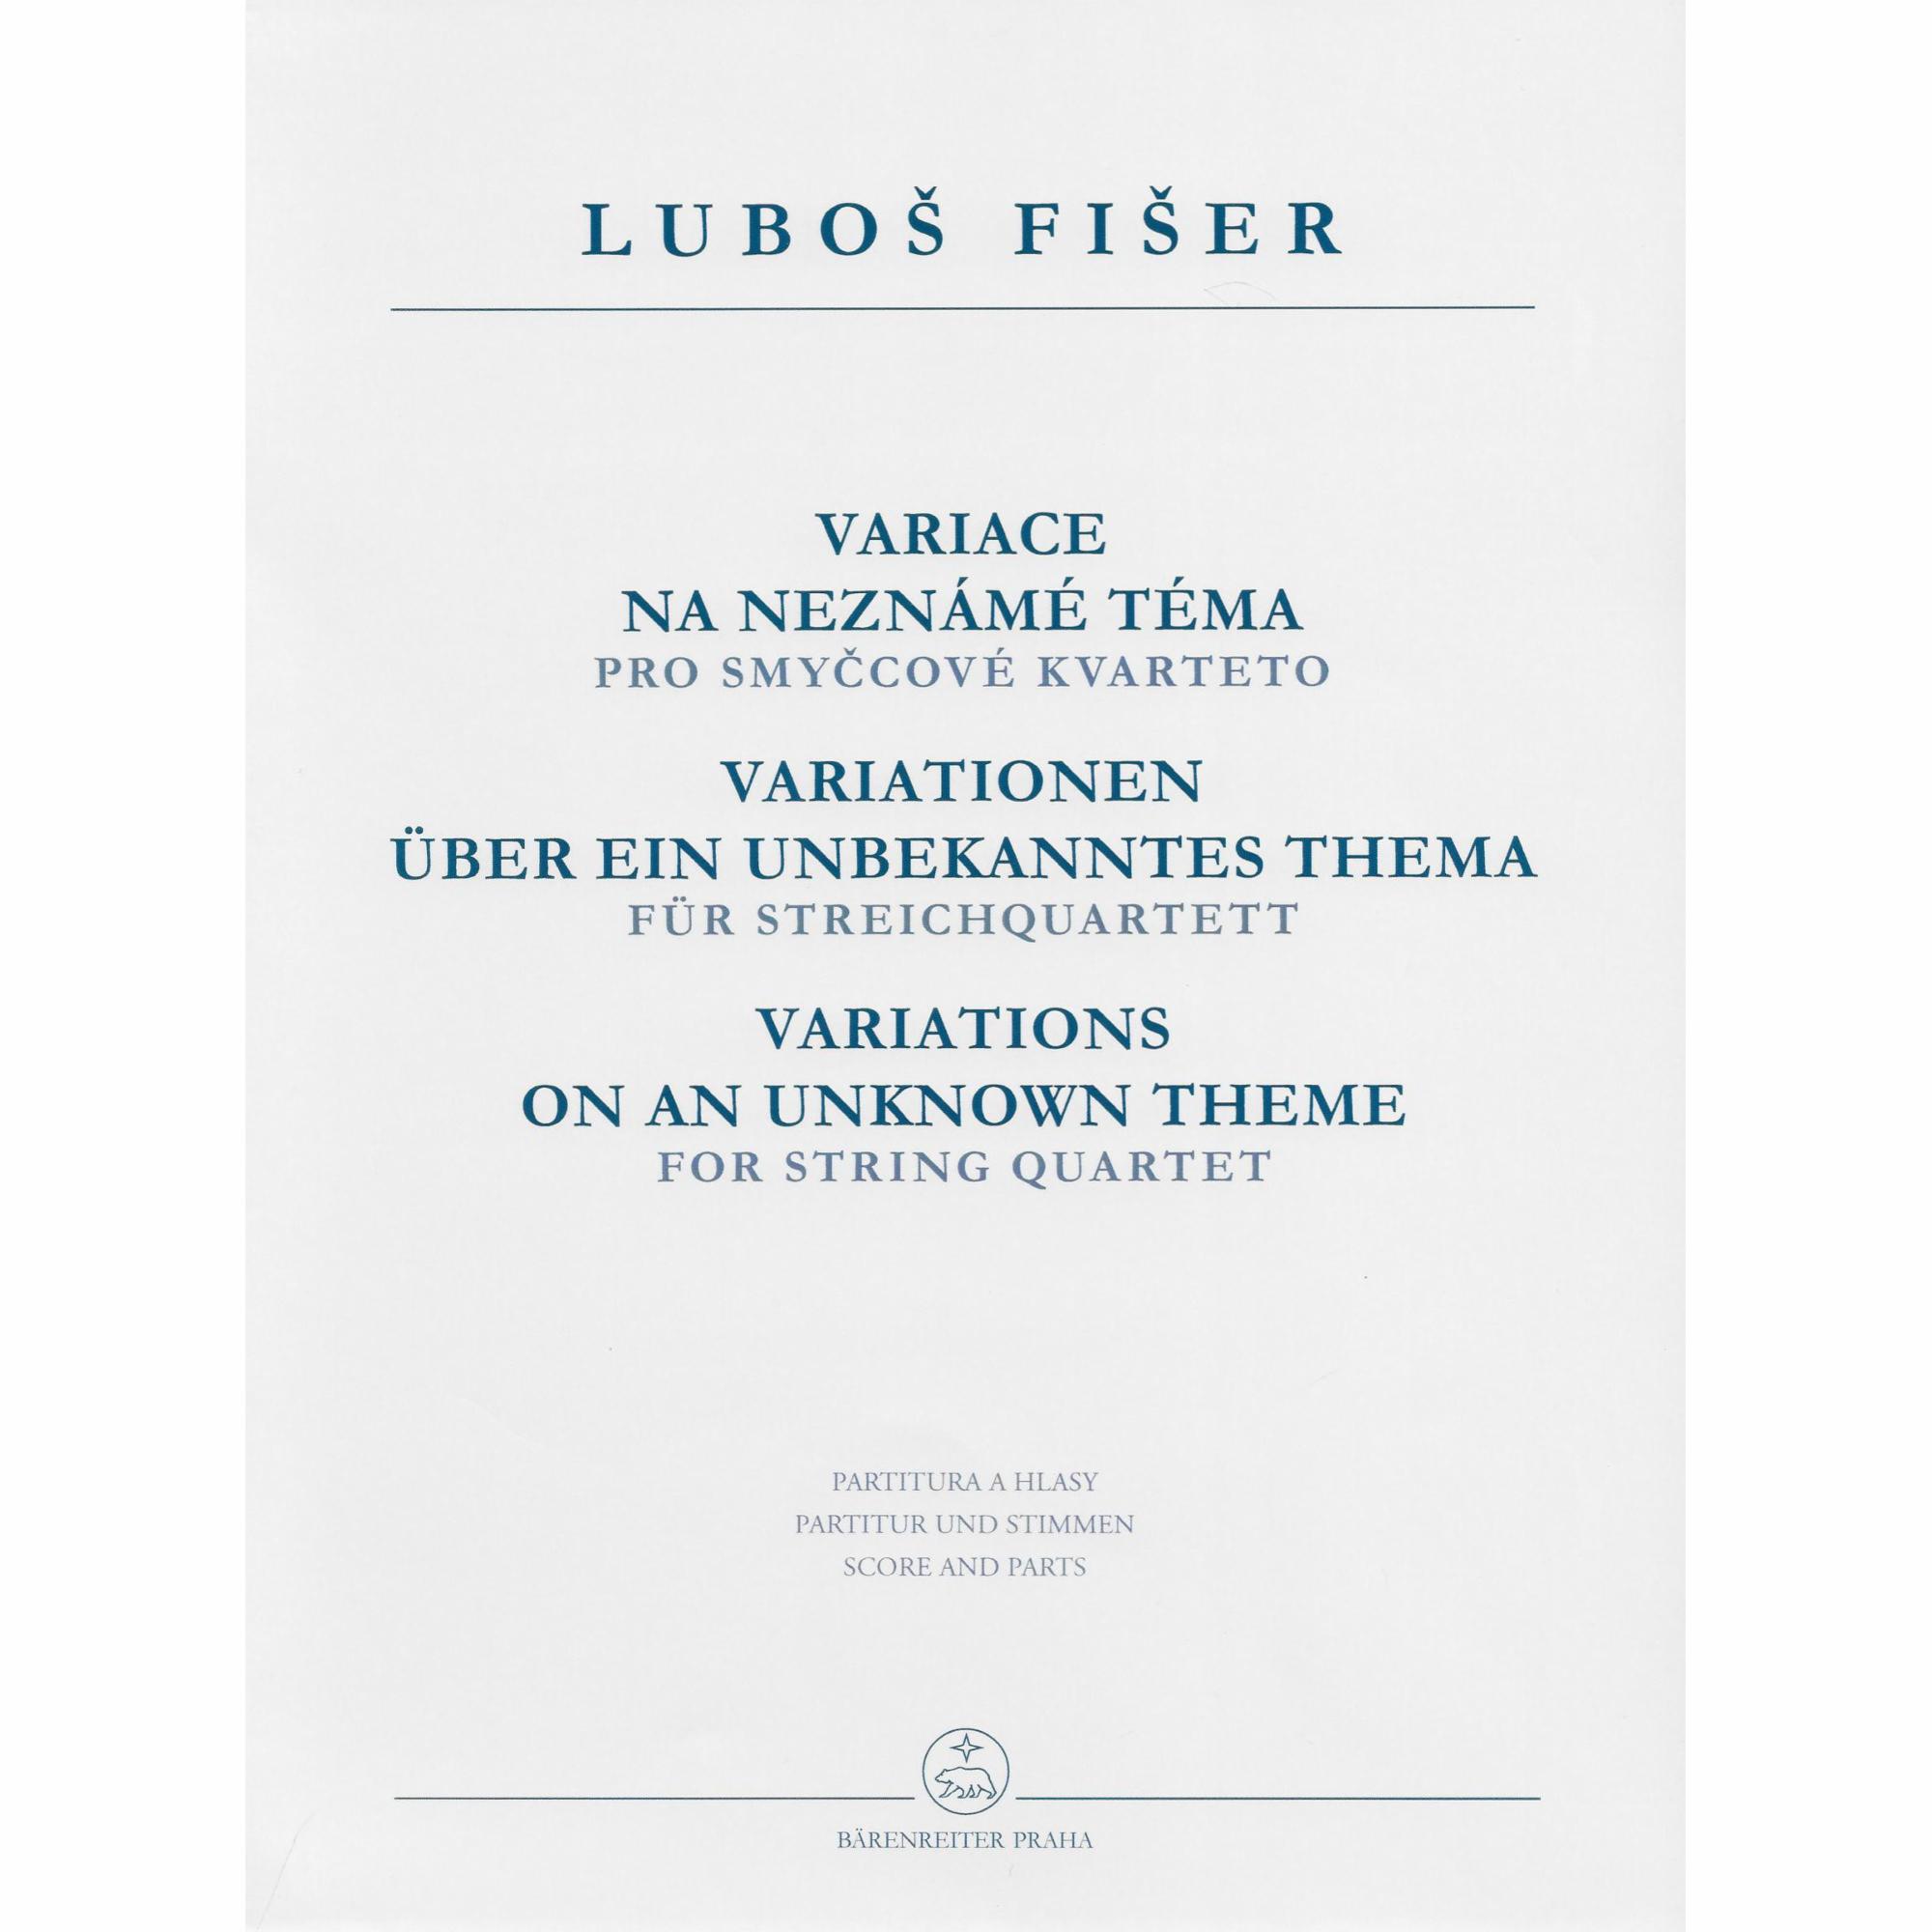 Fiser -- Variations on an Unknown Theme for String Quartet